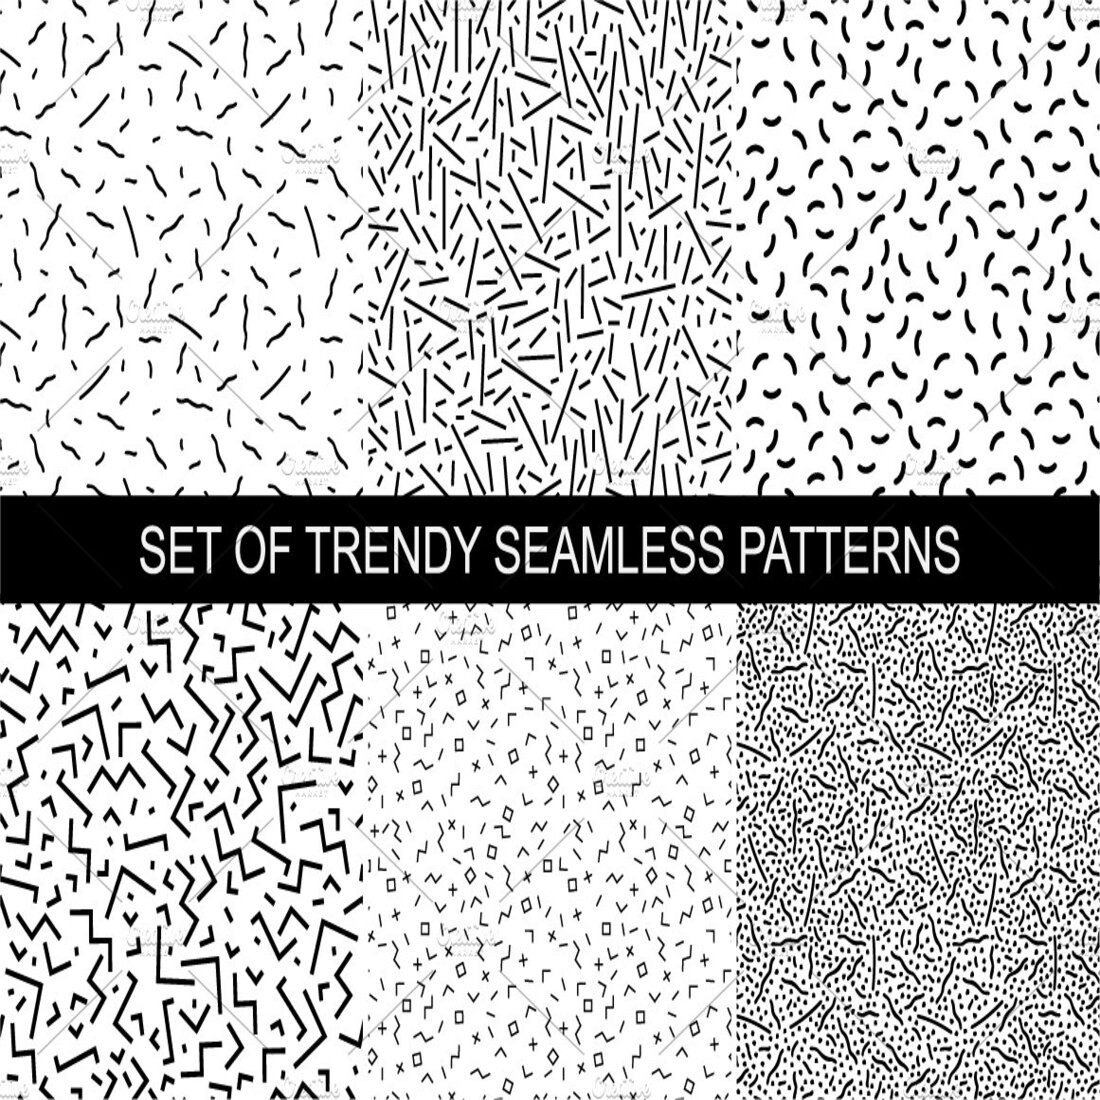 Trendy seamless patterns cover.